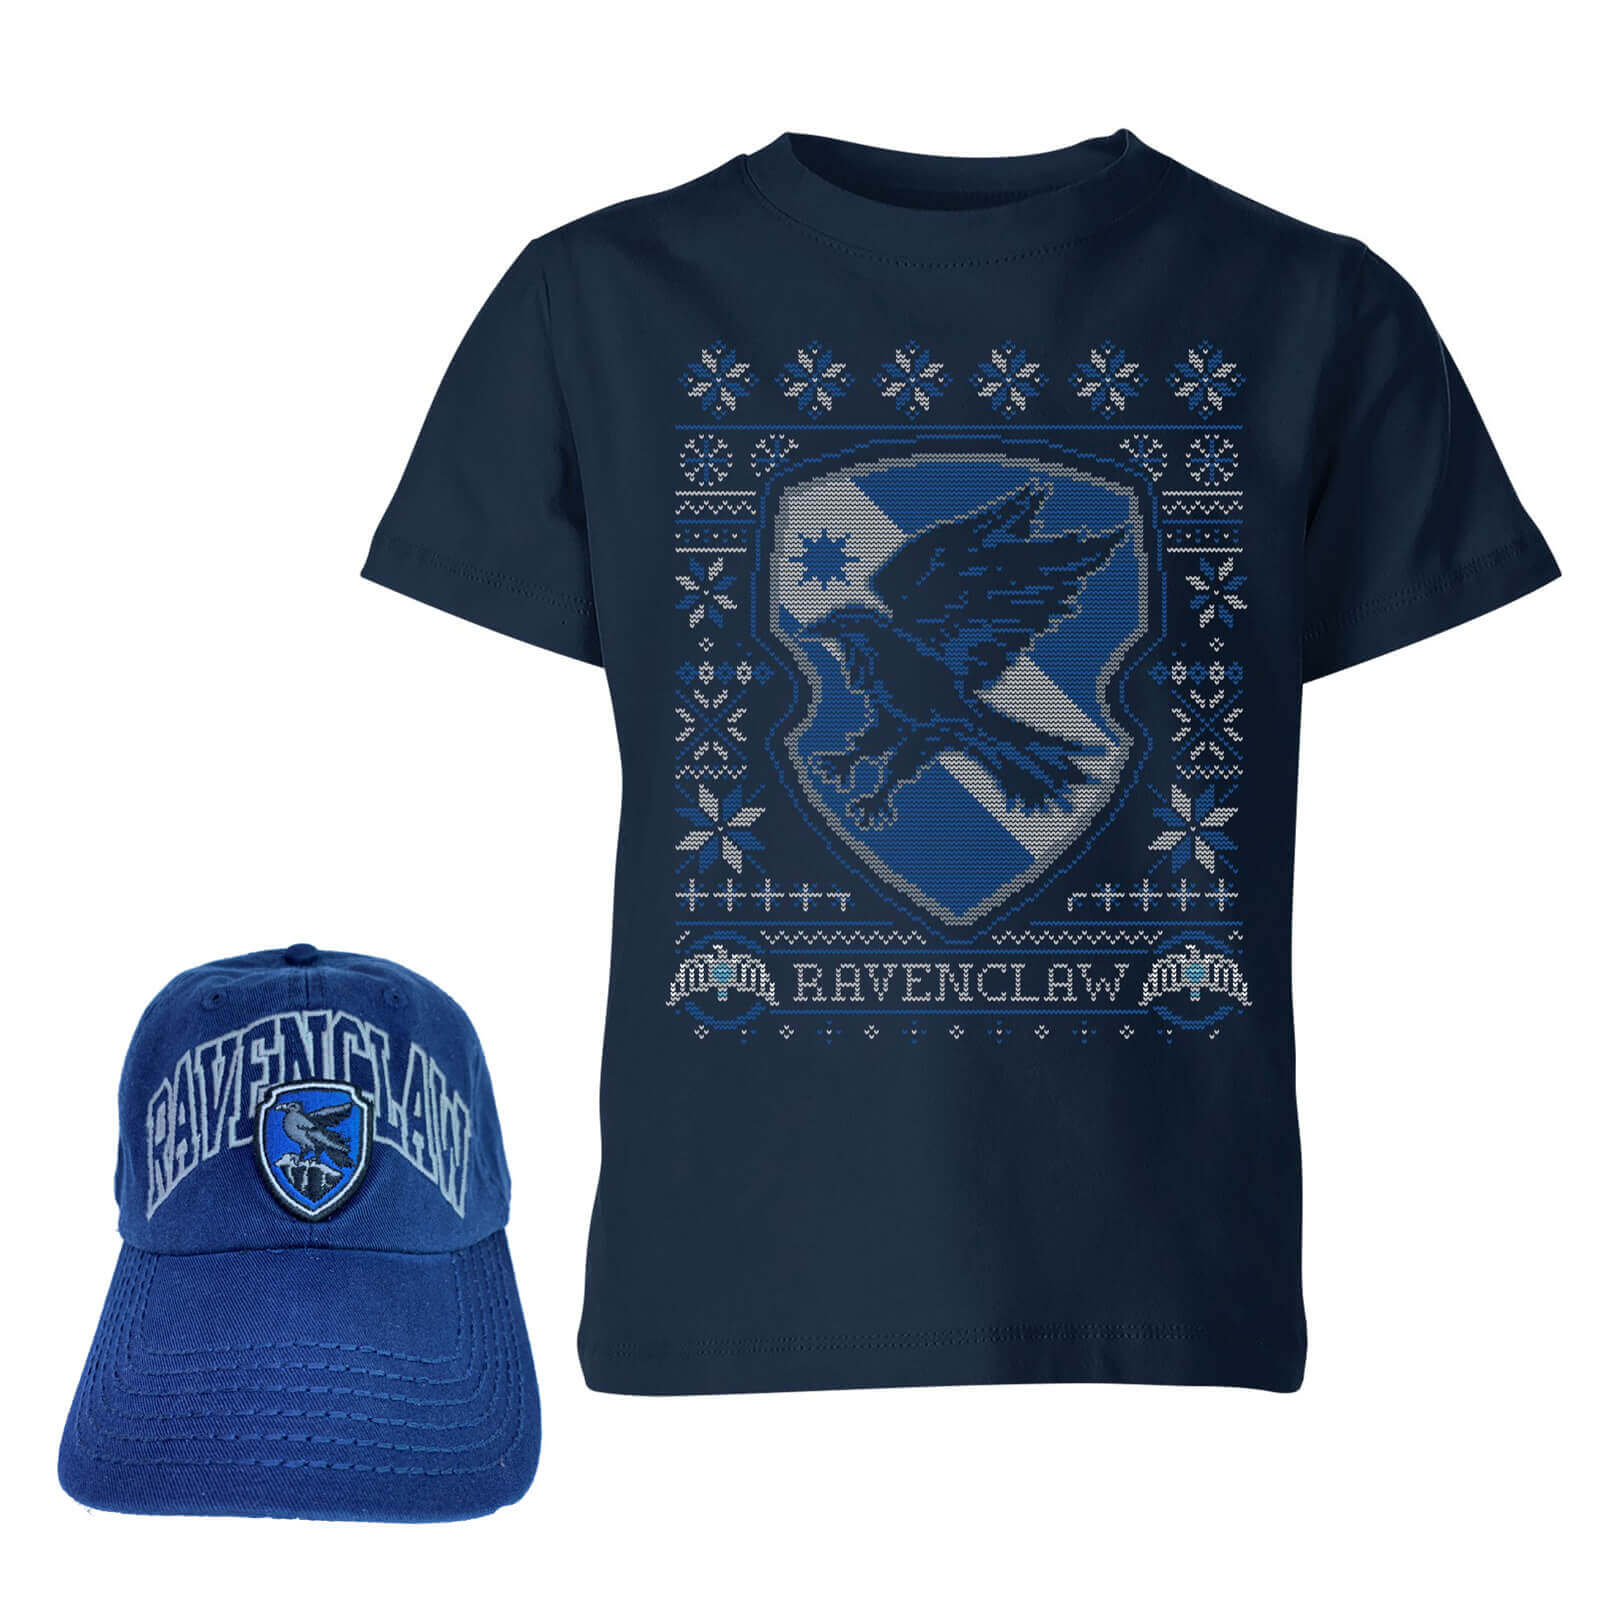 Harry Potter Ravenclaw T-Shirt and Cap Bundle - Navy - Kids' - 3-4 Years - Navy